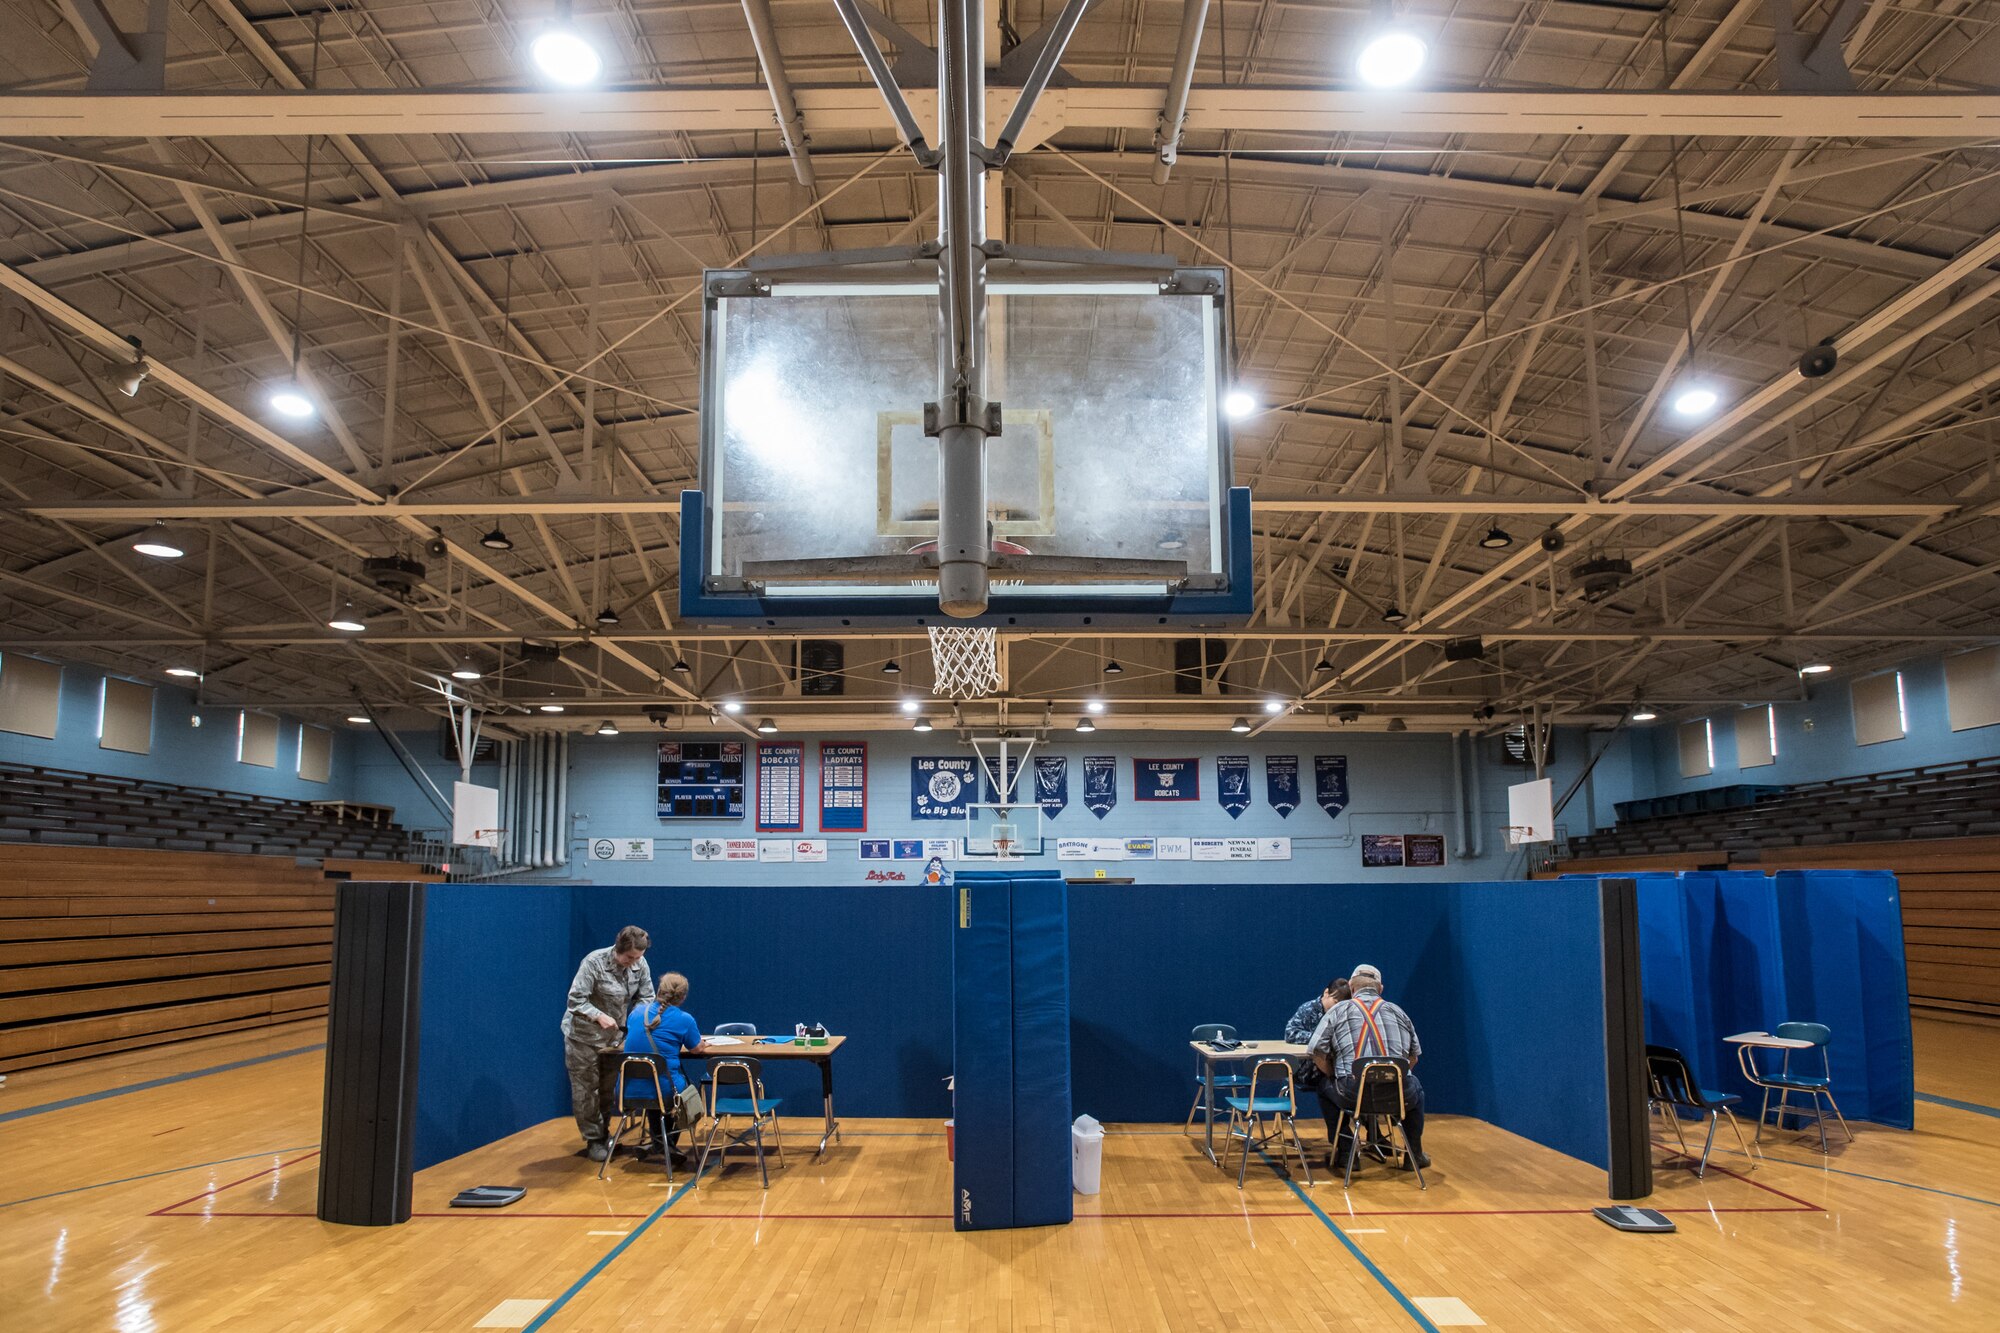 Area residents meet with medics in the gymnasium at Lee County High School in Beattyville, Ky., June 21, 2018, prior to receiving treatment at a health-care clinic being operated by the Air National Guard and U.S. Navy Reserve June 20, 2018. The clinic is one of four that comprised Operation Bobcat, a 10-day mission to provide military medical troops with crucial training in field operations and logistics while offering no-cost health care to the residents of Eastern Kentucky. The clinics, which operated from June 15-24, offered non-emergent medical care; sports physicals; dental cleanings, fillings and extractions; eye exams and no-cost prescription eye glasses. (U.S. Air National Guard photo by Lt. Col. Dale Greer)